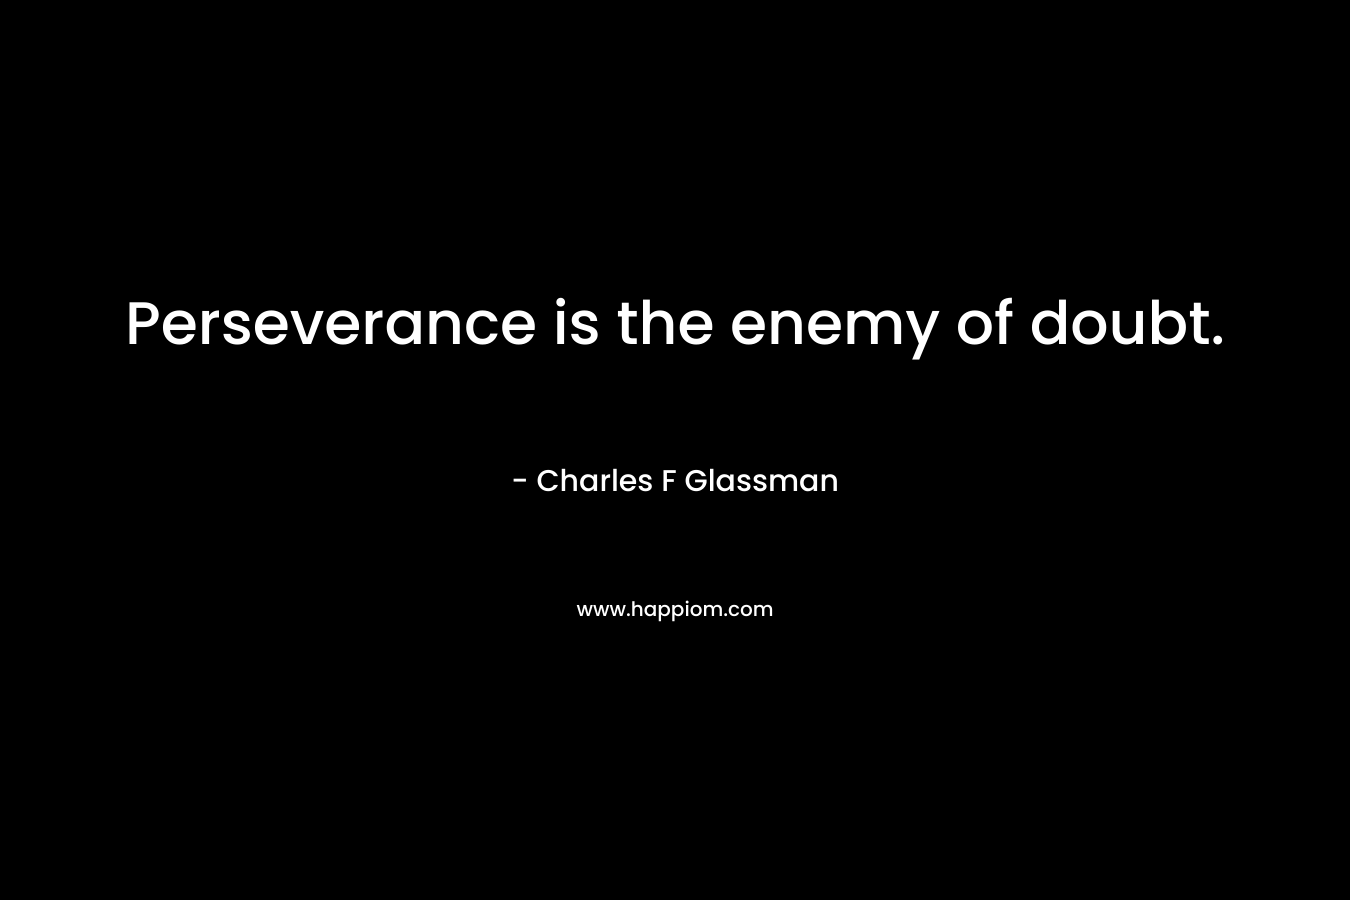 Perseverance is the enemy of doubt.